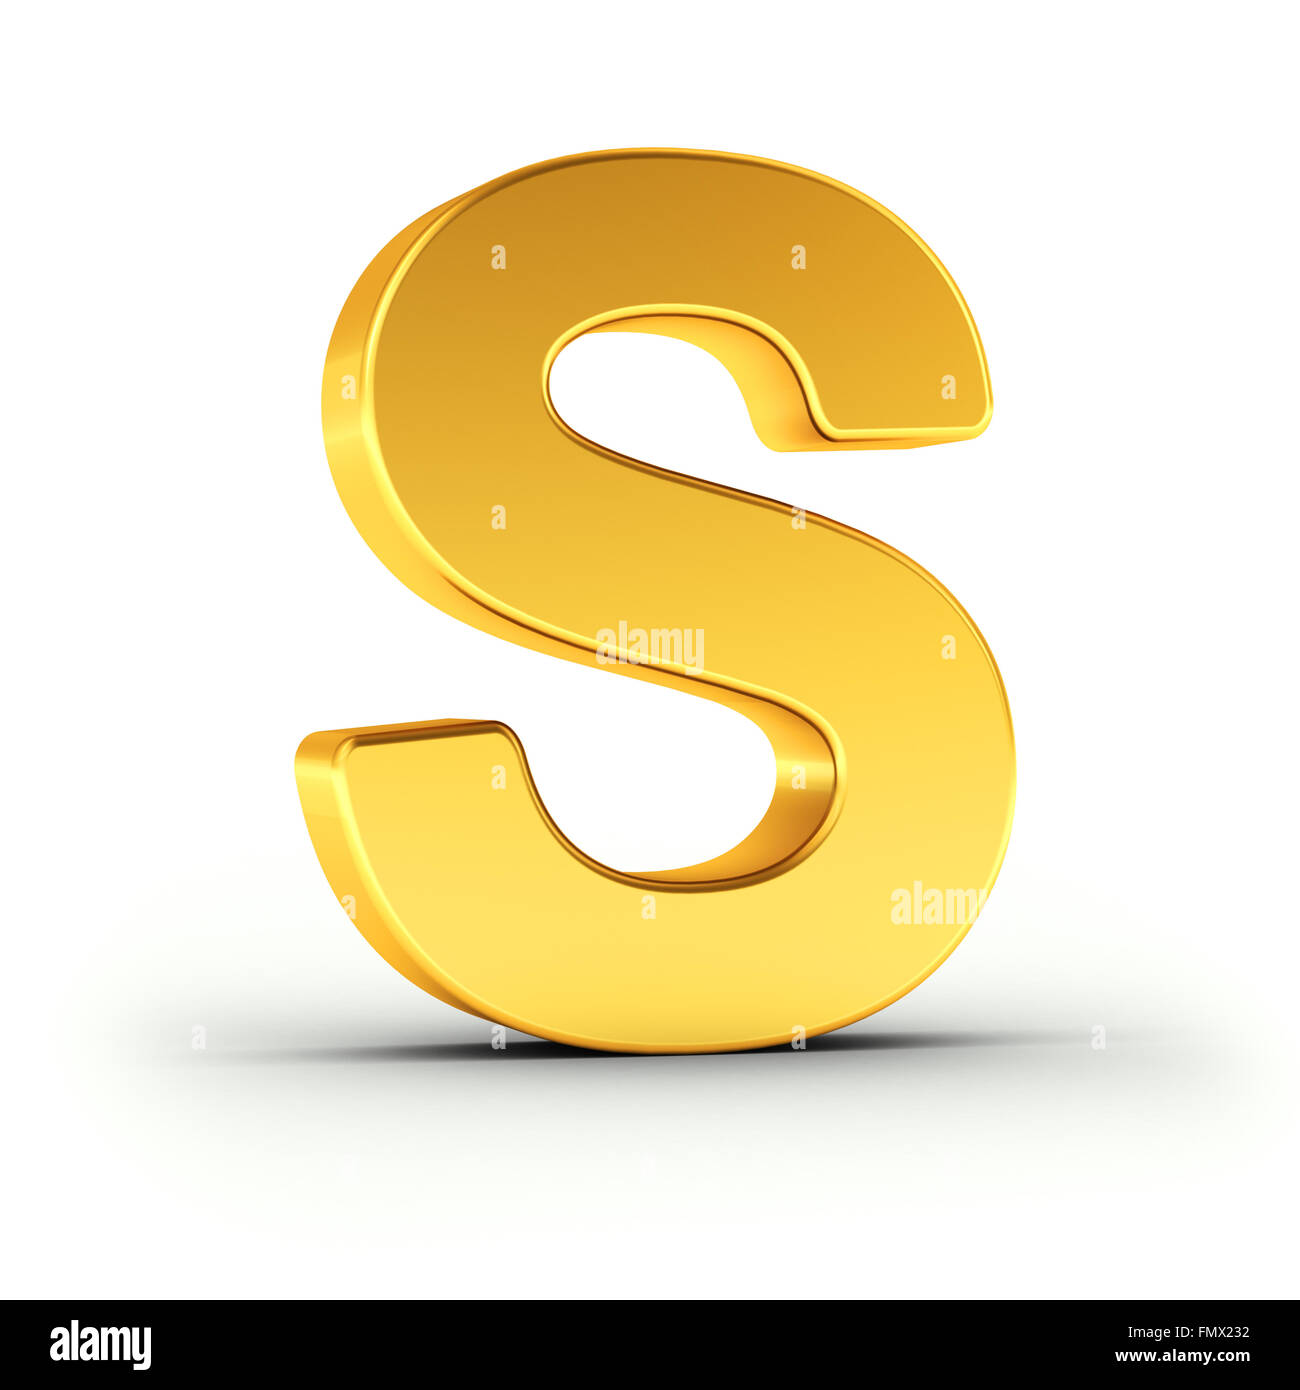 The Letter S as a polished golden object Stock Photo